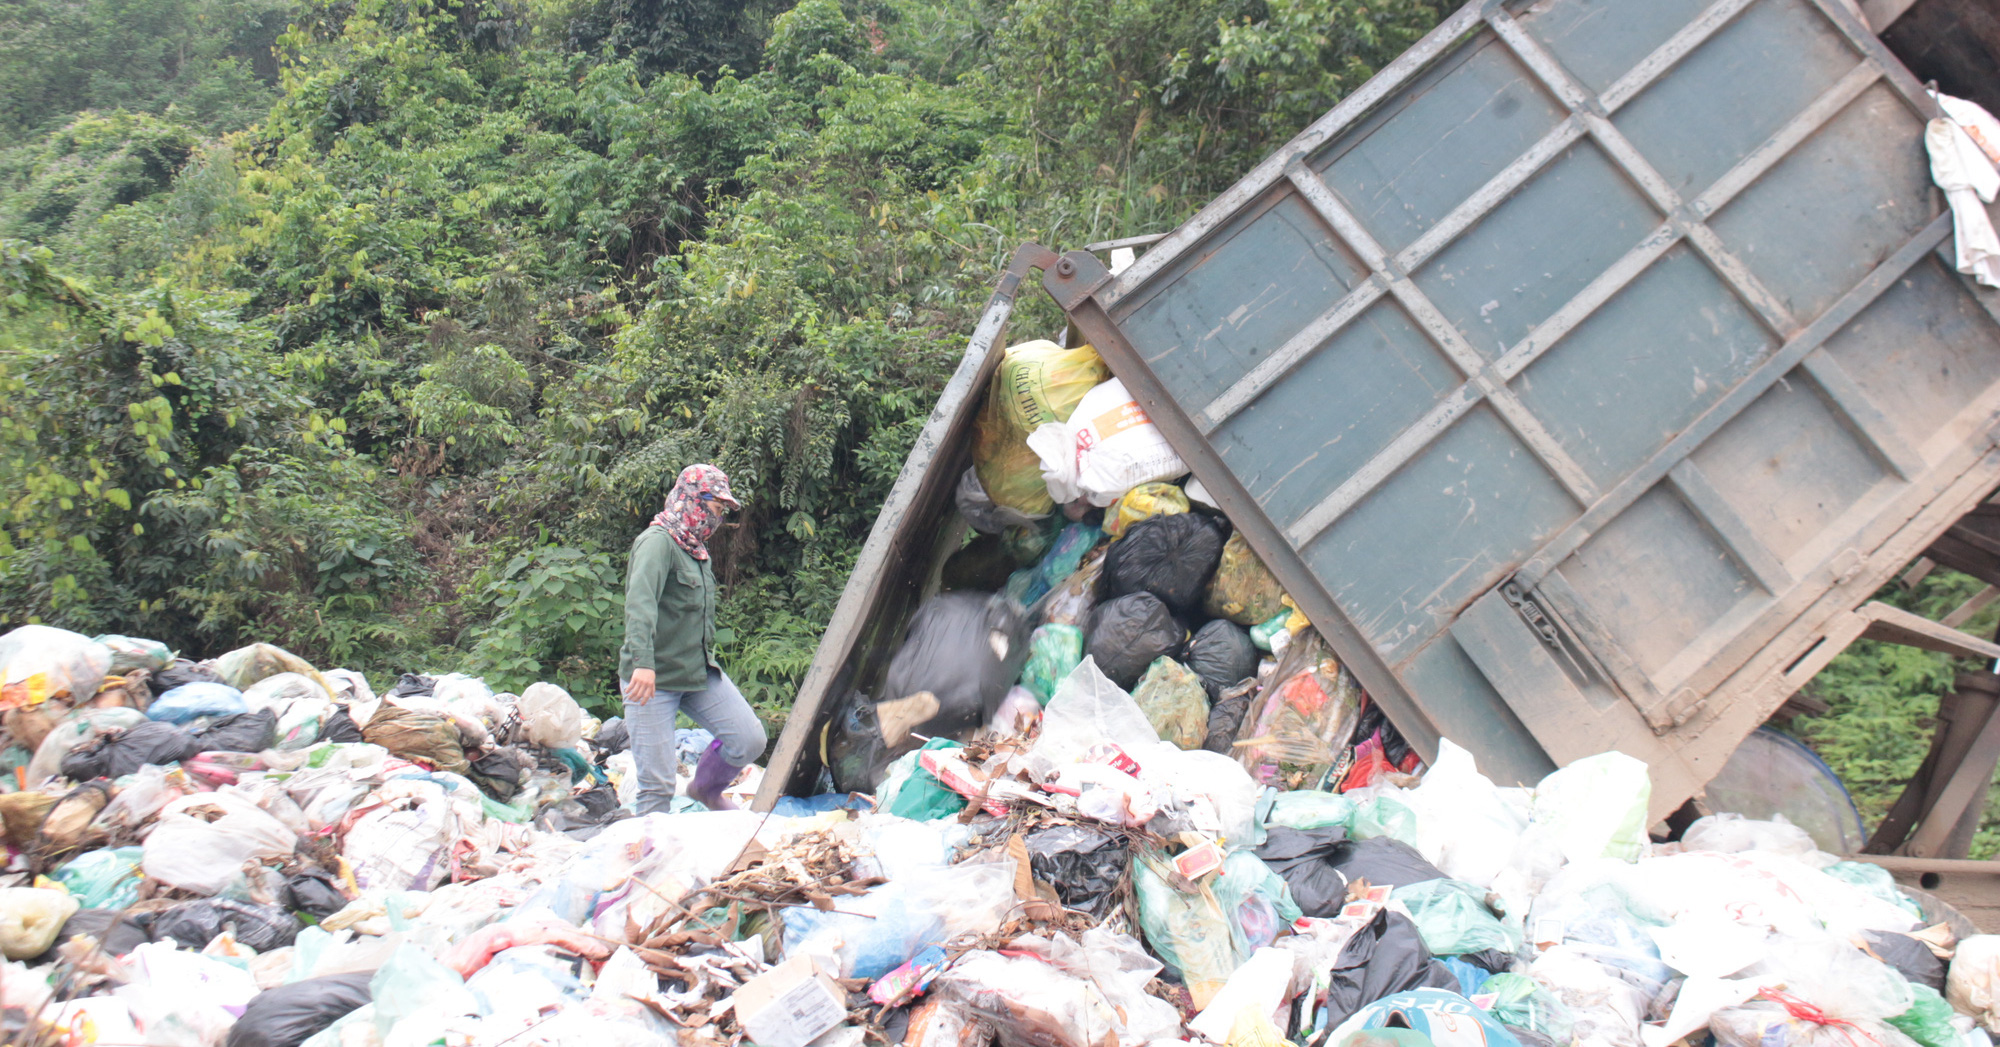 Collecting garbage day and night, wages are not enough to live on